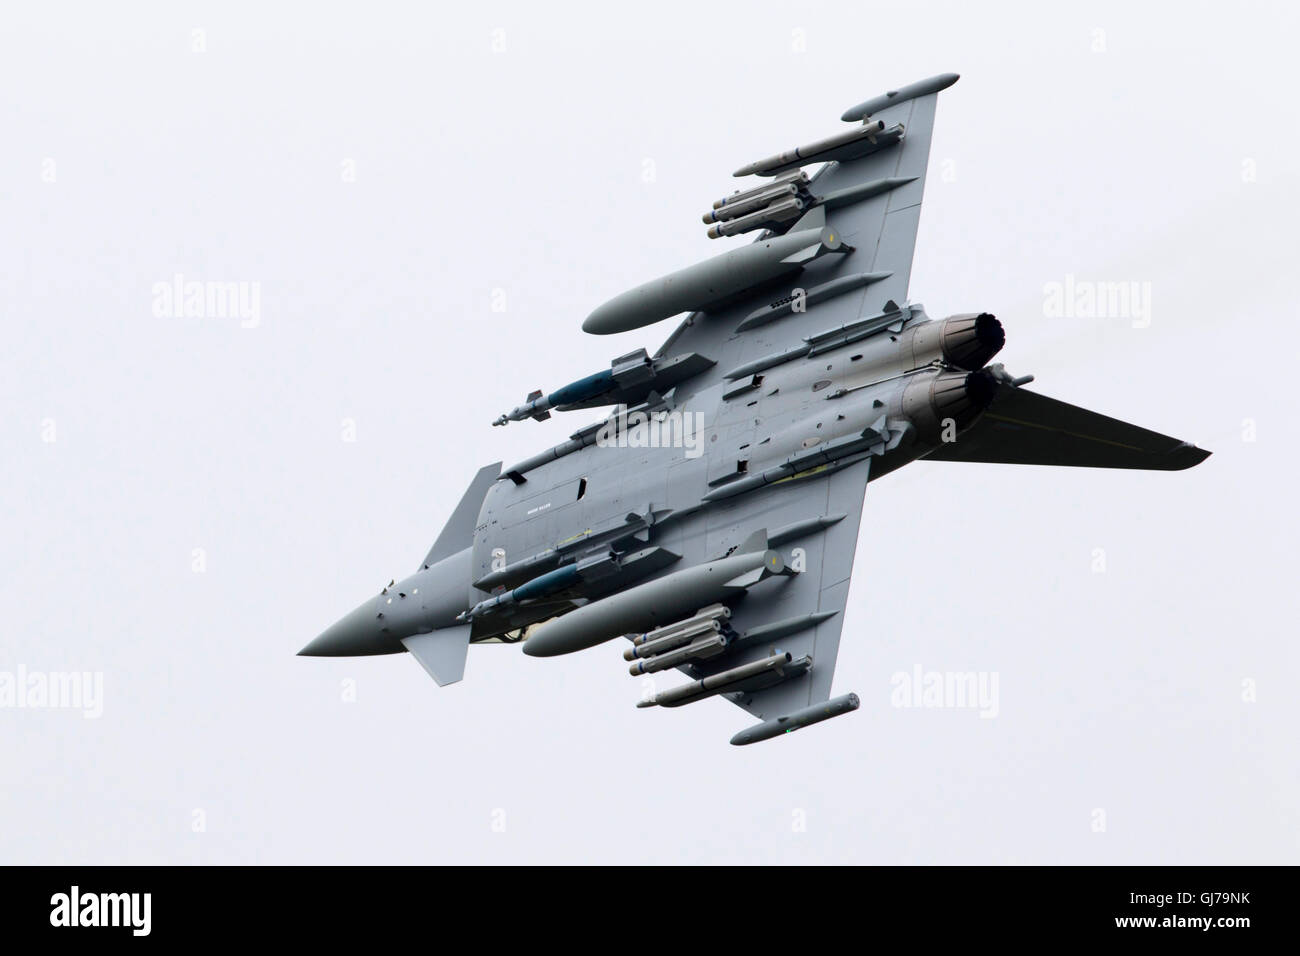 Royal Air Force (RAF) BAE Systems Eurofighter Typhoon FGR4 with weapons on board at RIAT 2016, Royal International Air Tattoo Stock Photo